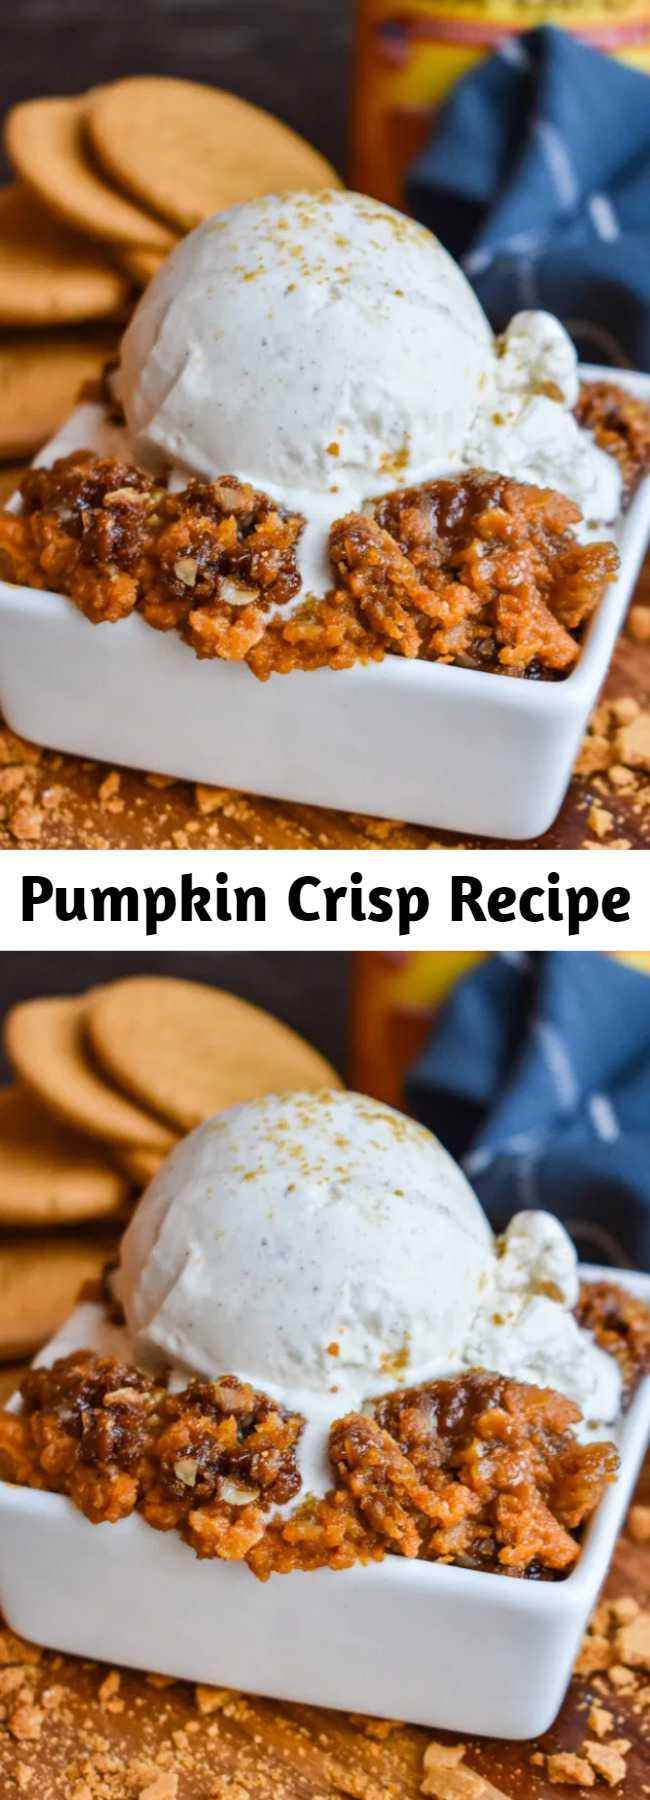 Pumpkin Crisp Recipe - It’ll take about 1 bite of this goodness to realize Pumpkin Crisp is your new favorite fall dessert! The smooth, perfectly spiced pumpkin filling and the crunchy topping is truly a match made in heaven!! #Pumpkin #PumpkinCrisp #ALaMode #GingersnapCookies #Crisp